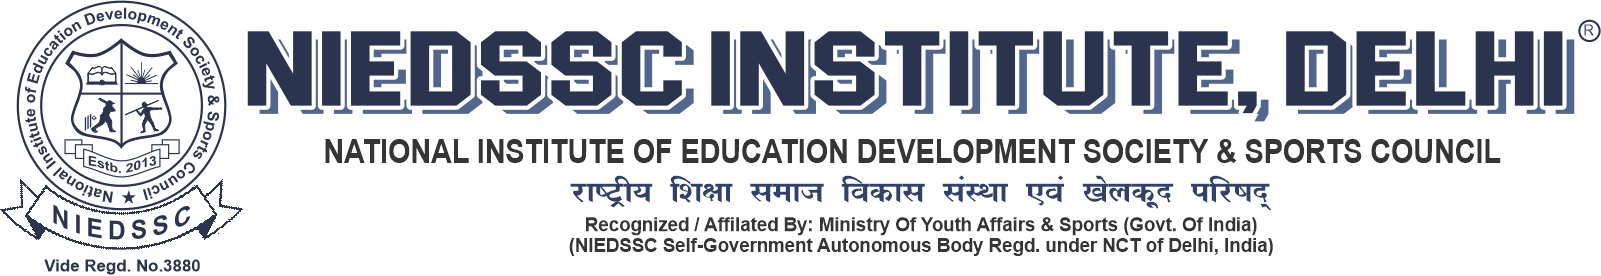 NATIONAL INSTITUTE OF EDUCATION DEVELOPMENT SOCIETY & SPORTS COUNCIL